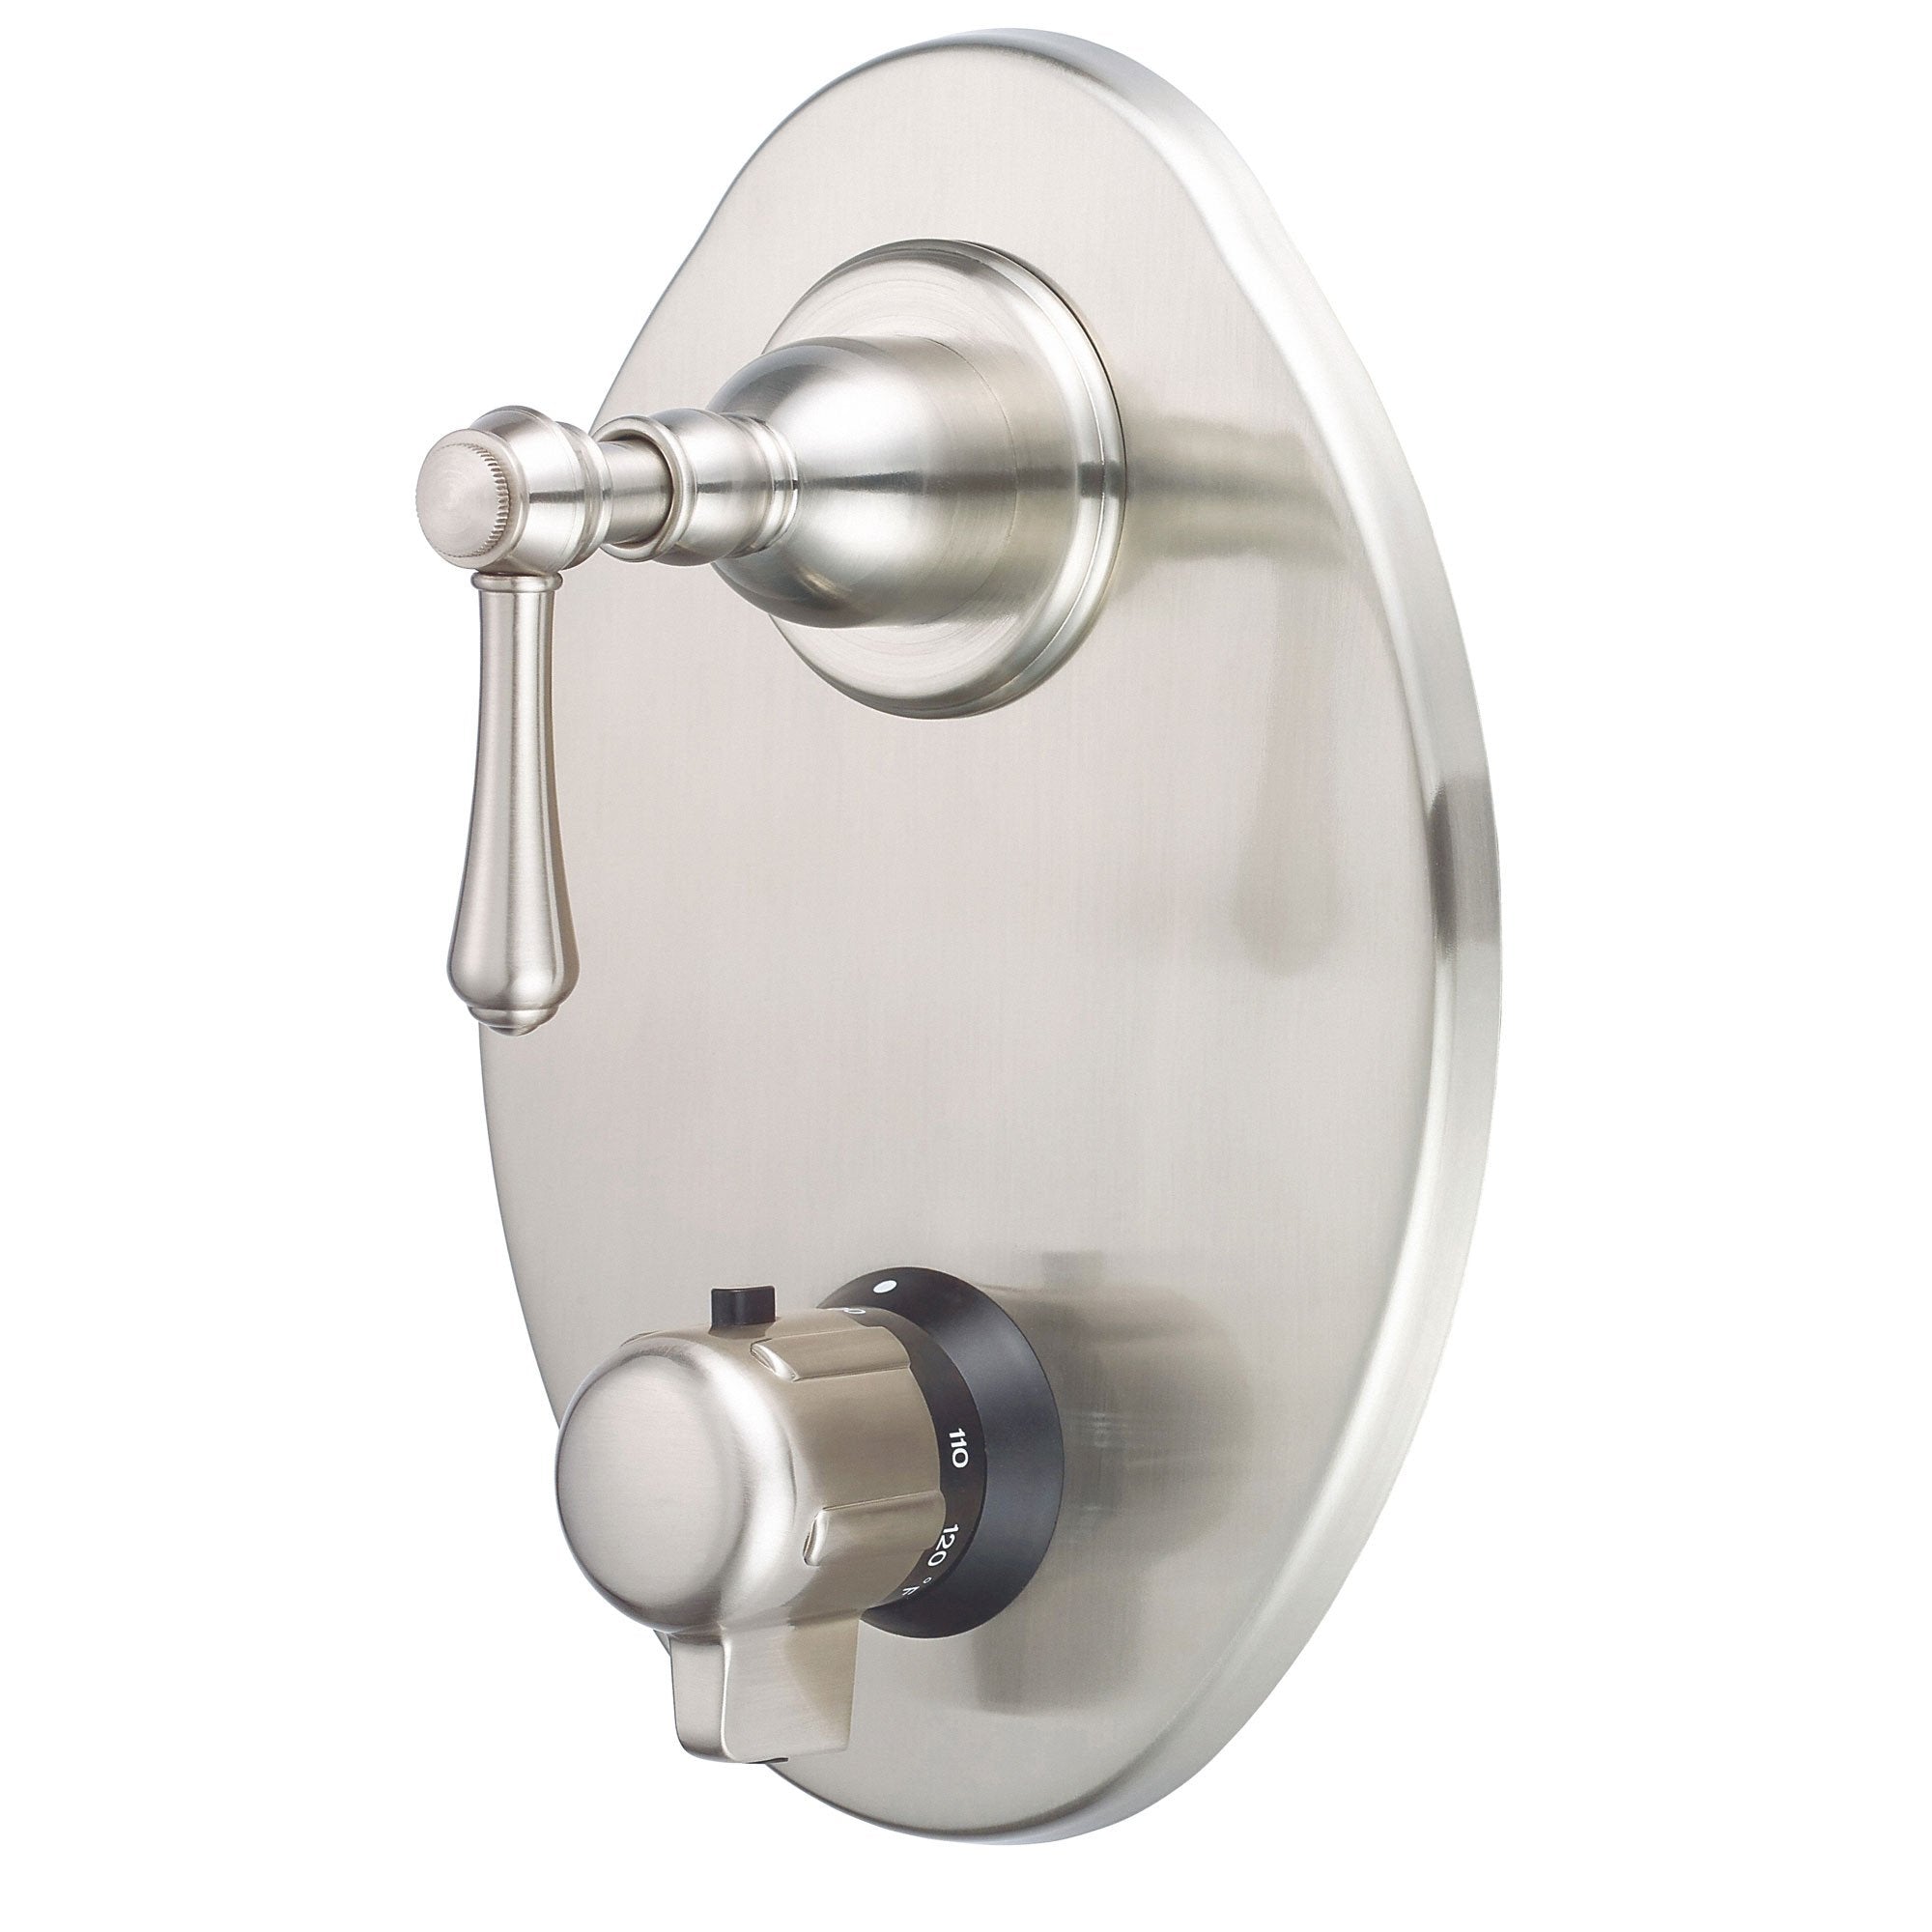 Danze Opulence Brushed Nickel 1 2 Thermostatic Shower Faucet